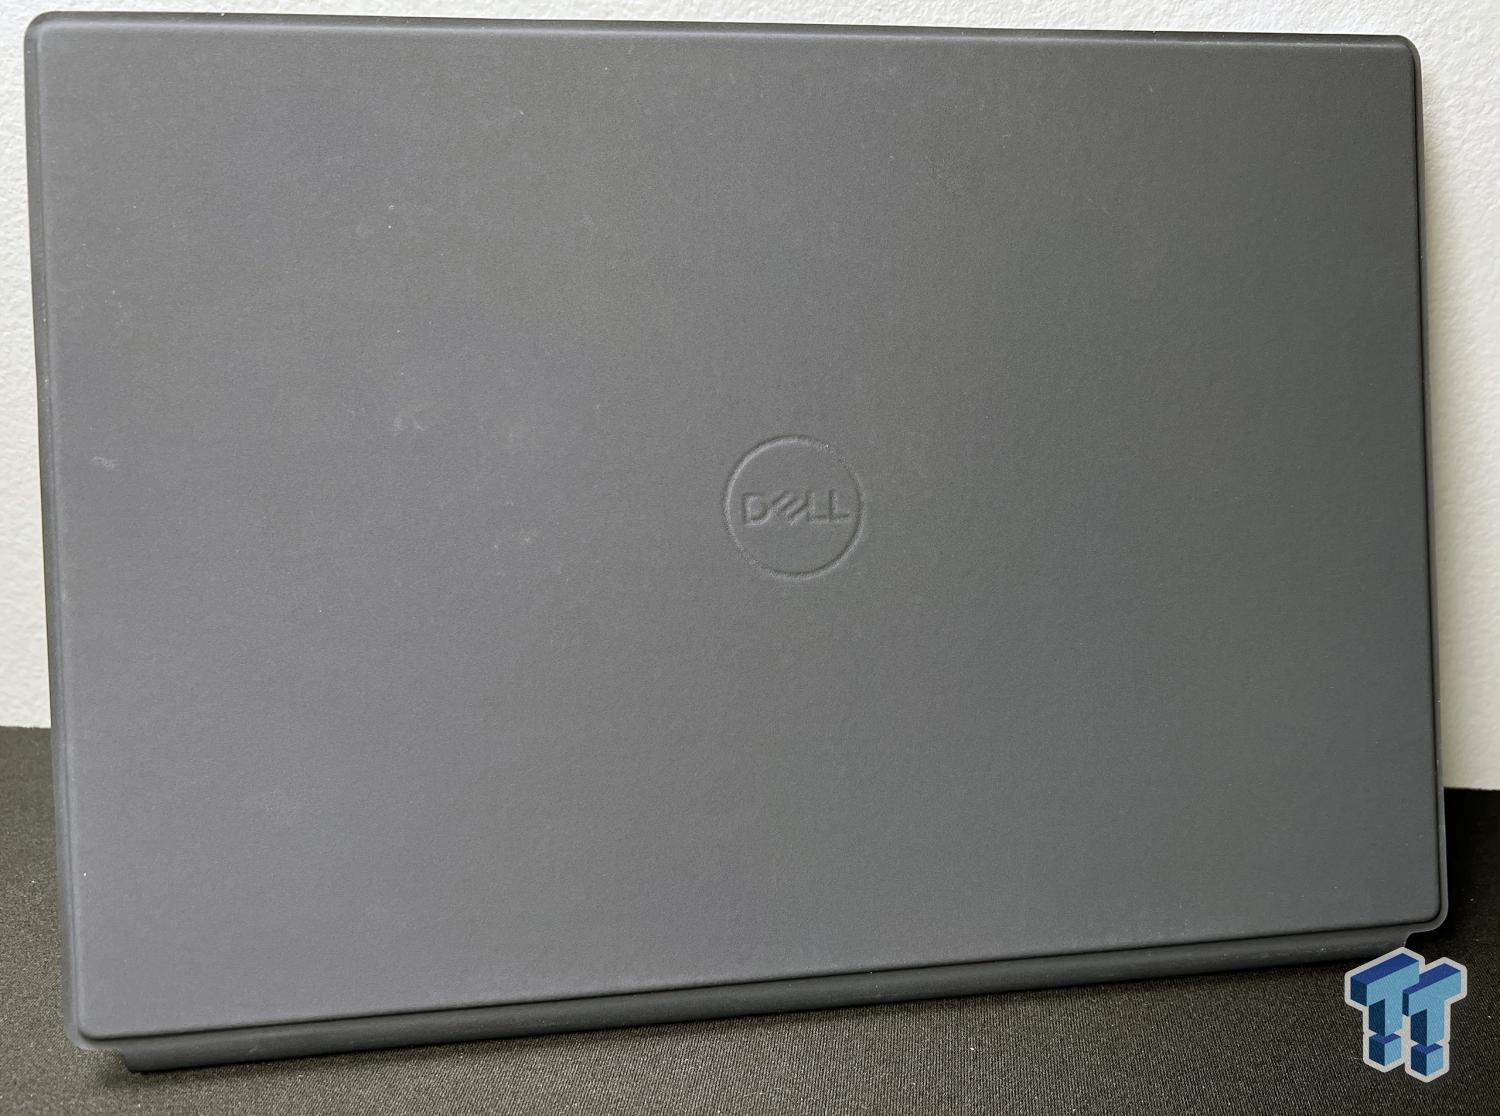 Dell XPS 9315 2-in-1 Notebook Review